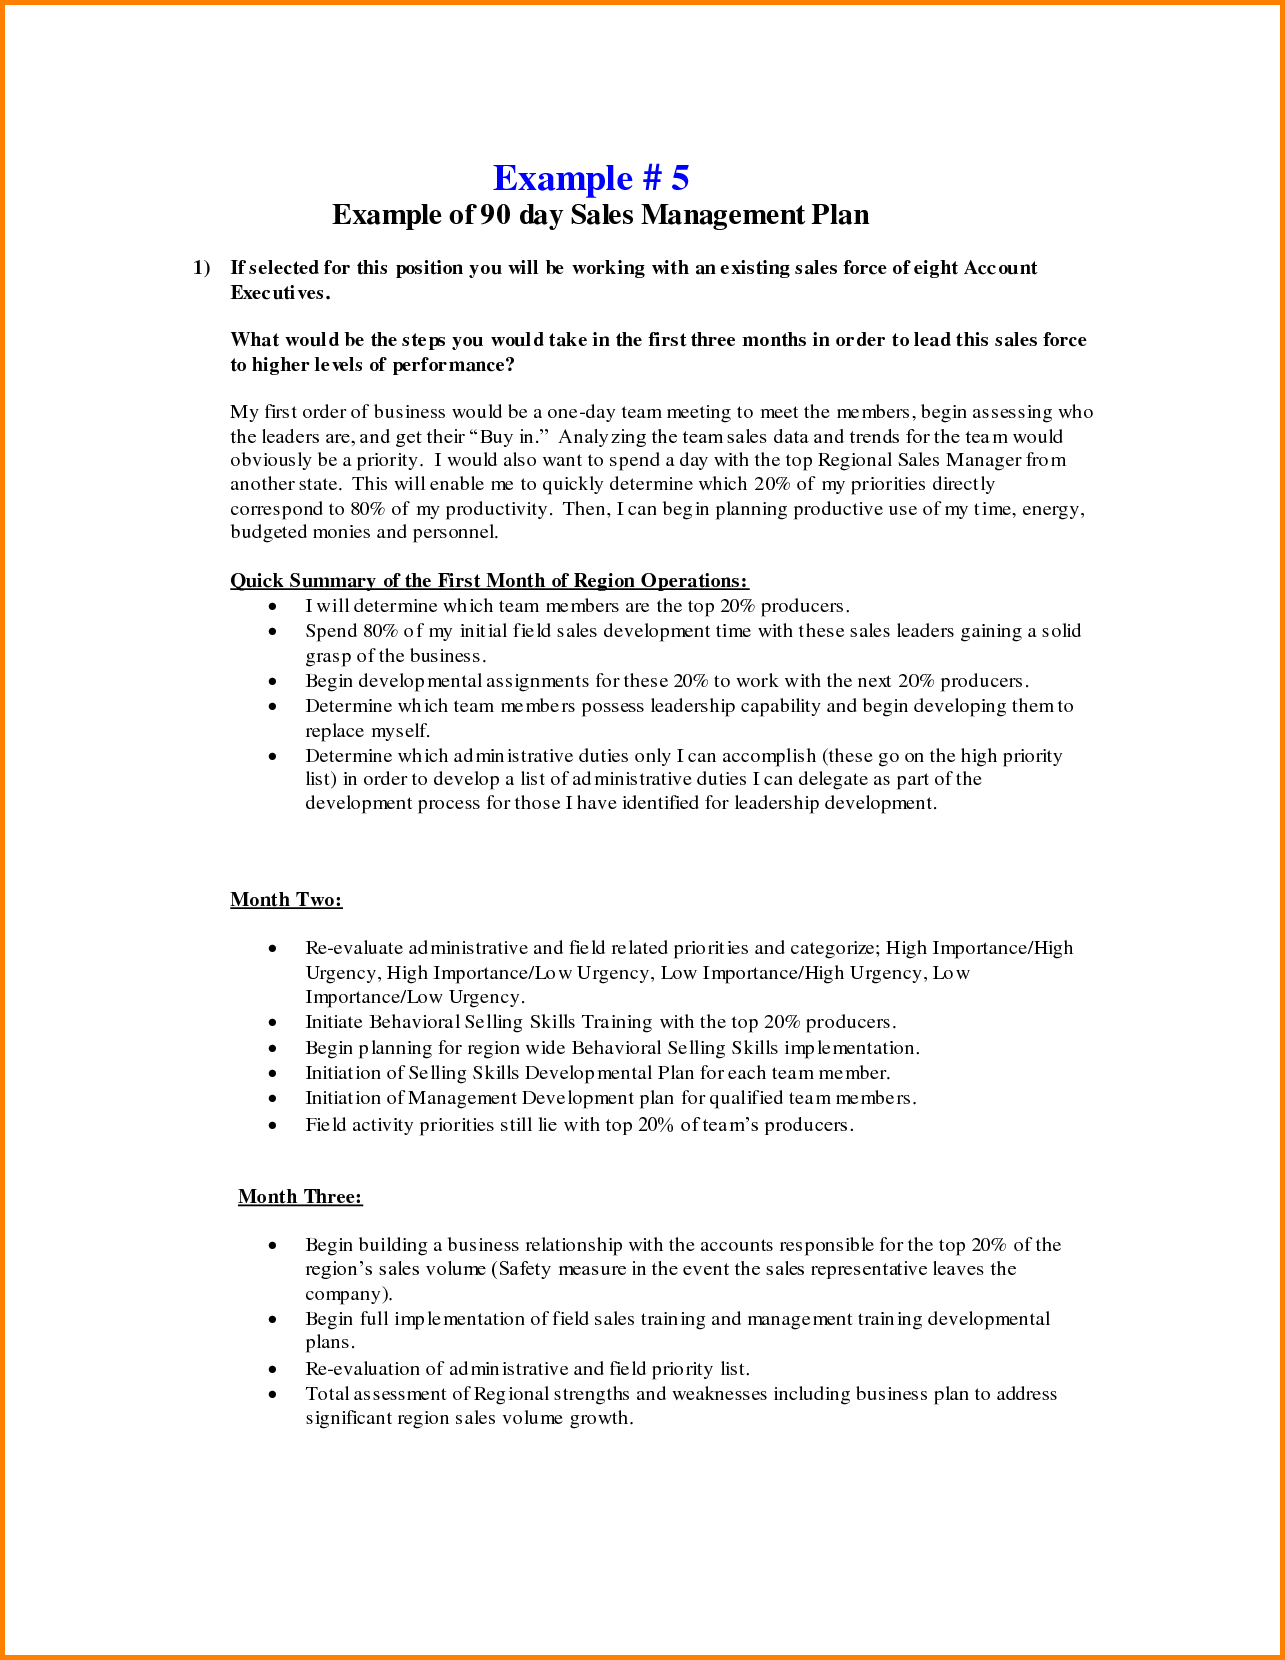 Day Business An Template Word 30 60 90 Plan 30 60 90 Sales For 30 60 90 Day Plan Template Word